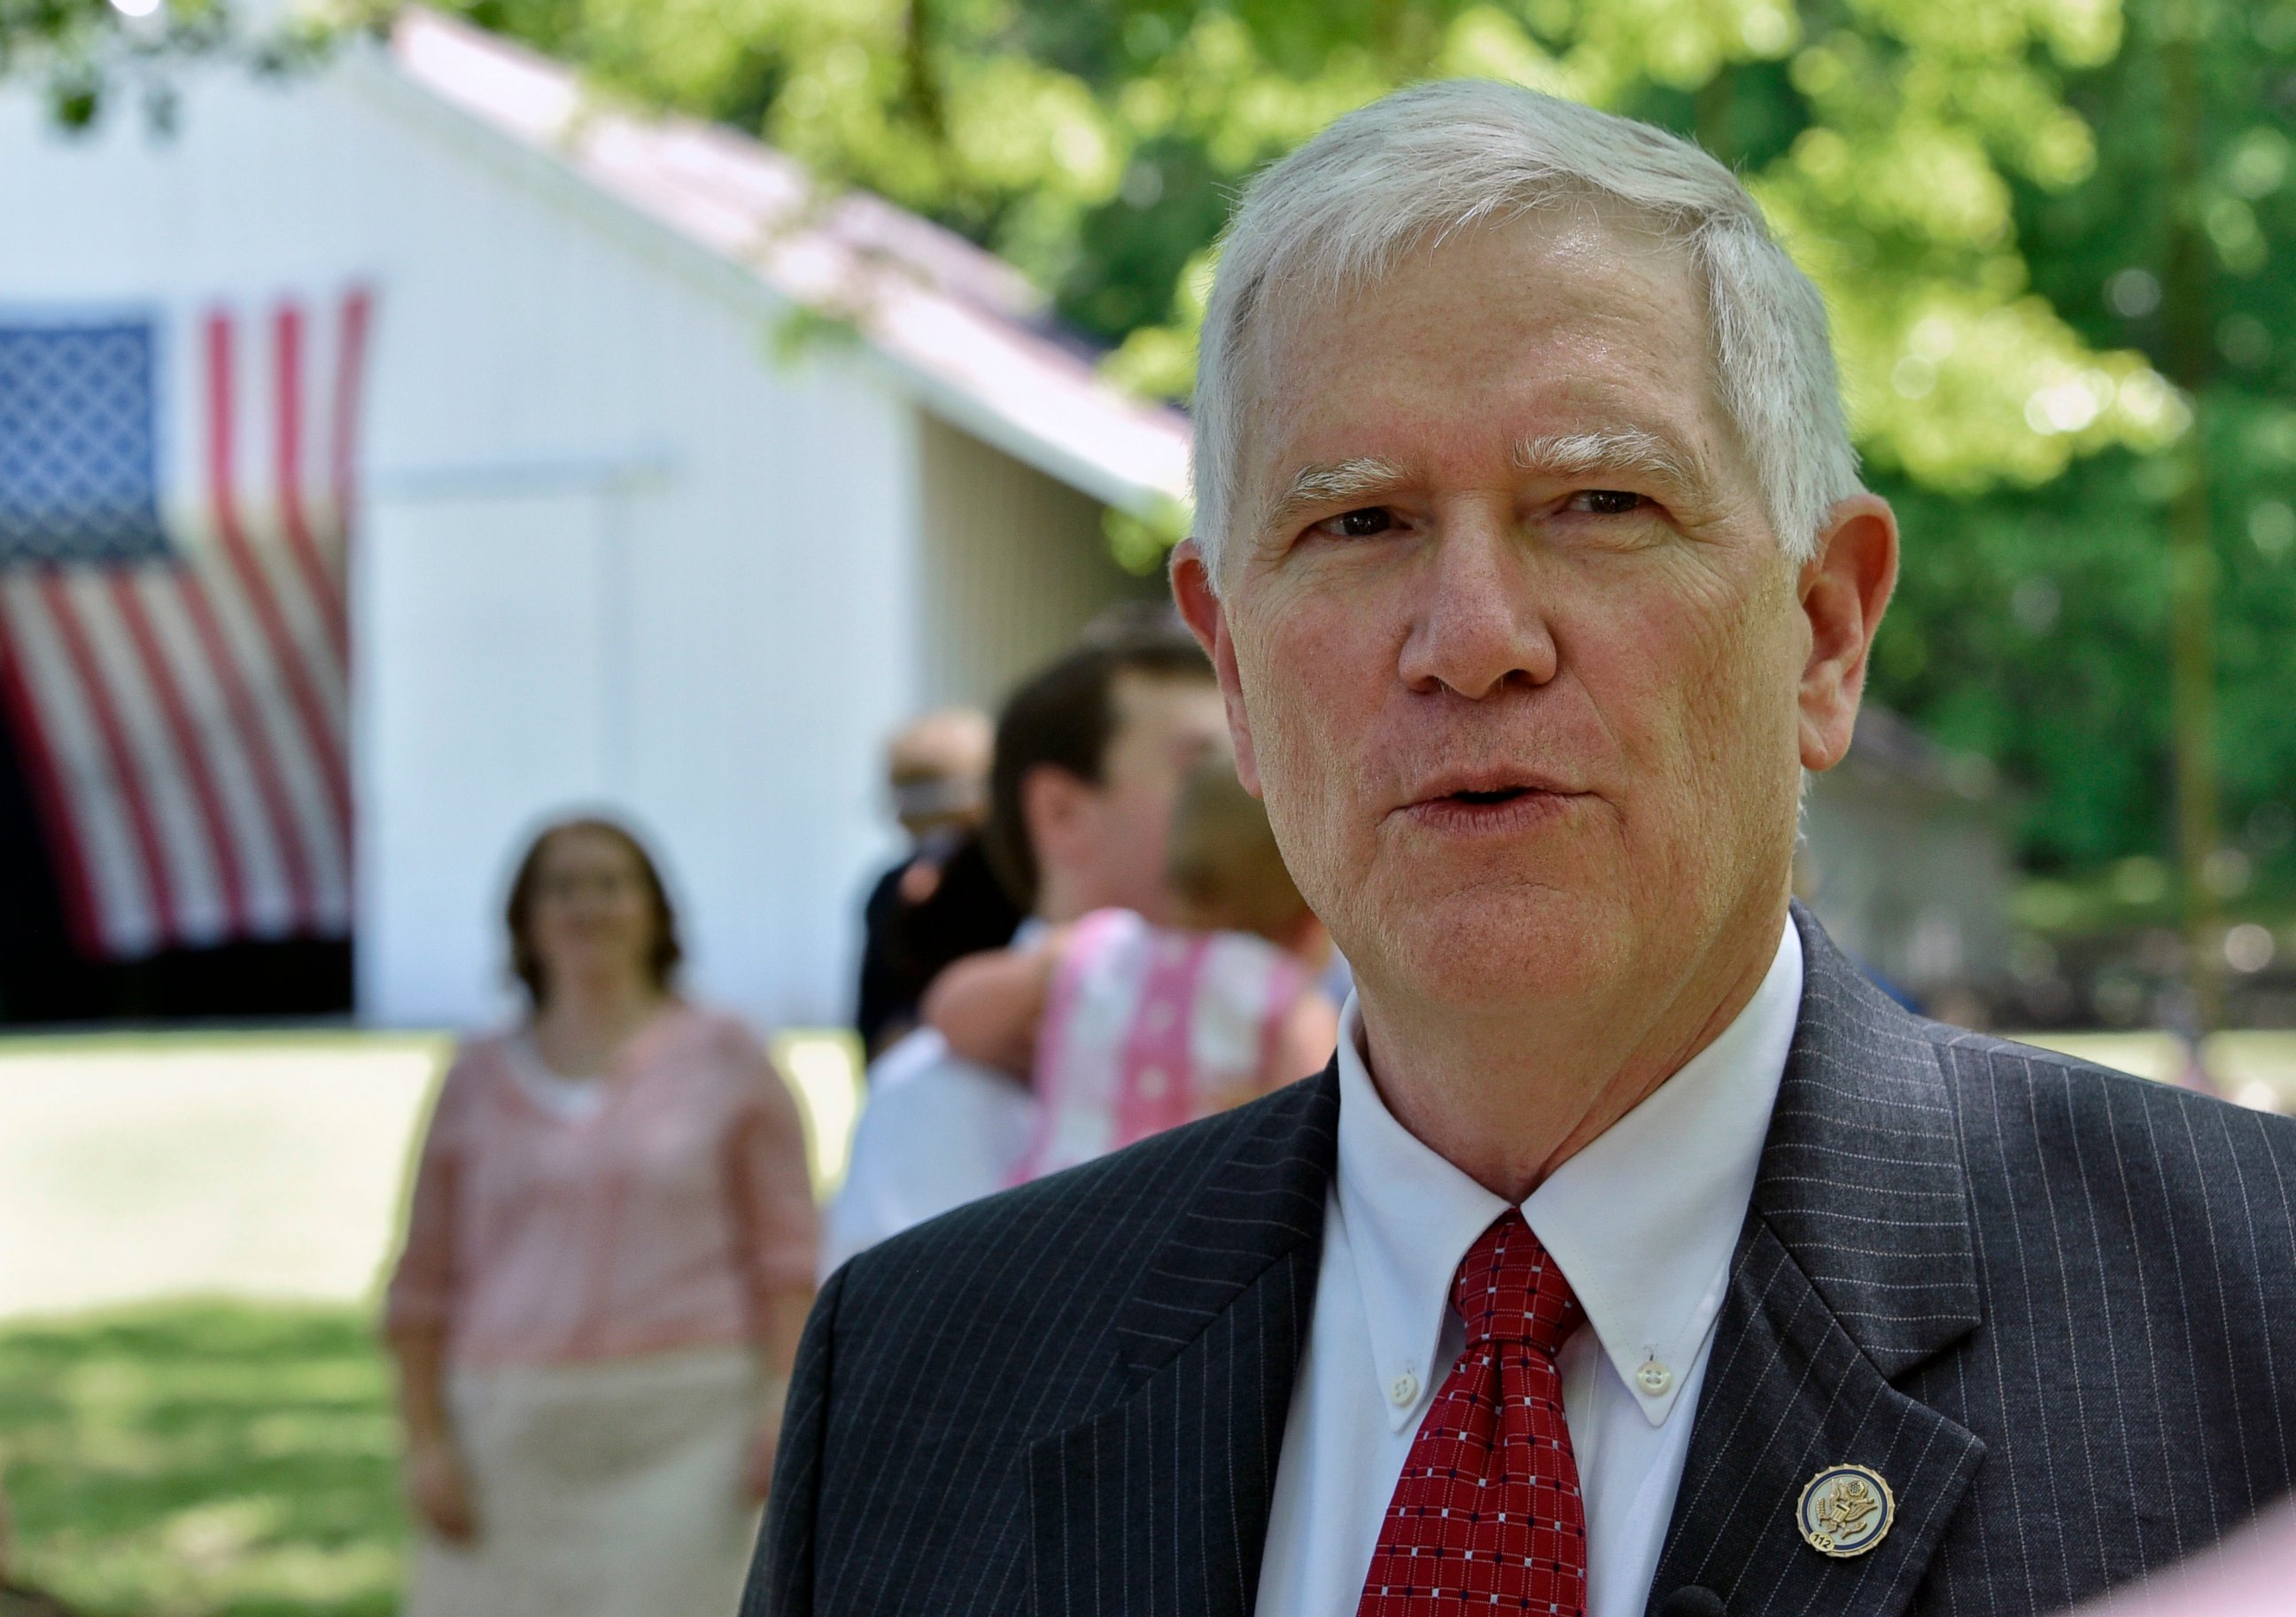 PHOTO: In this May 15, 2017, file photo, Alabama Congressman Mo Brooks announces his candidacy for the U.S. Senate in Huntsville, Ala.